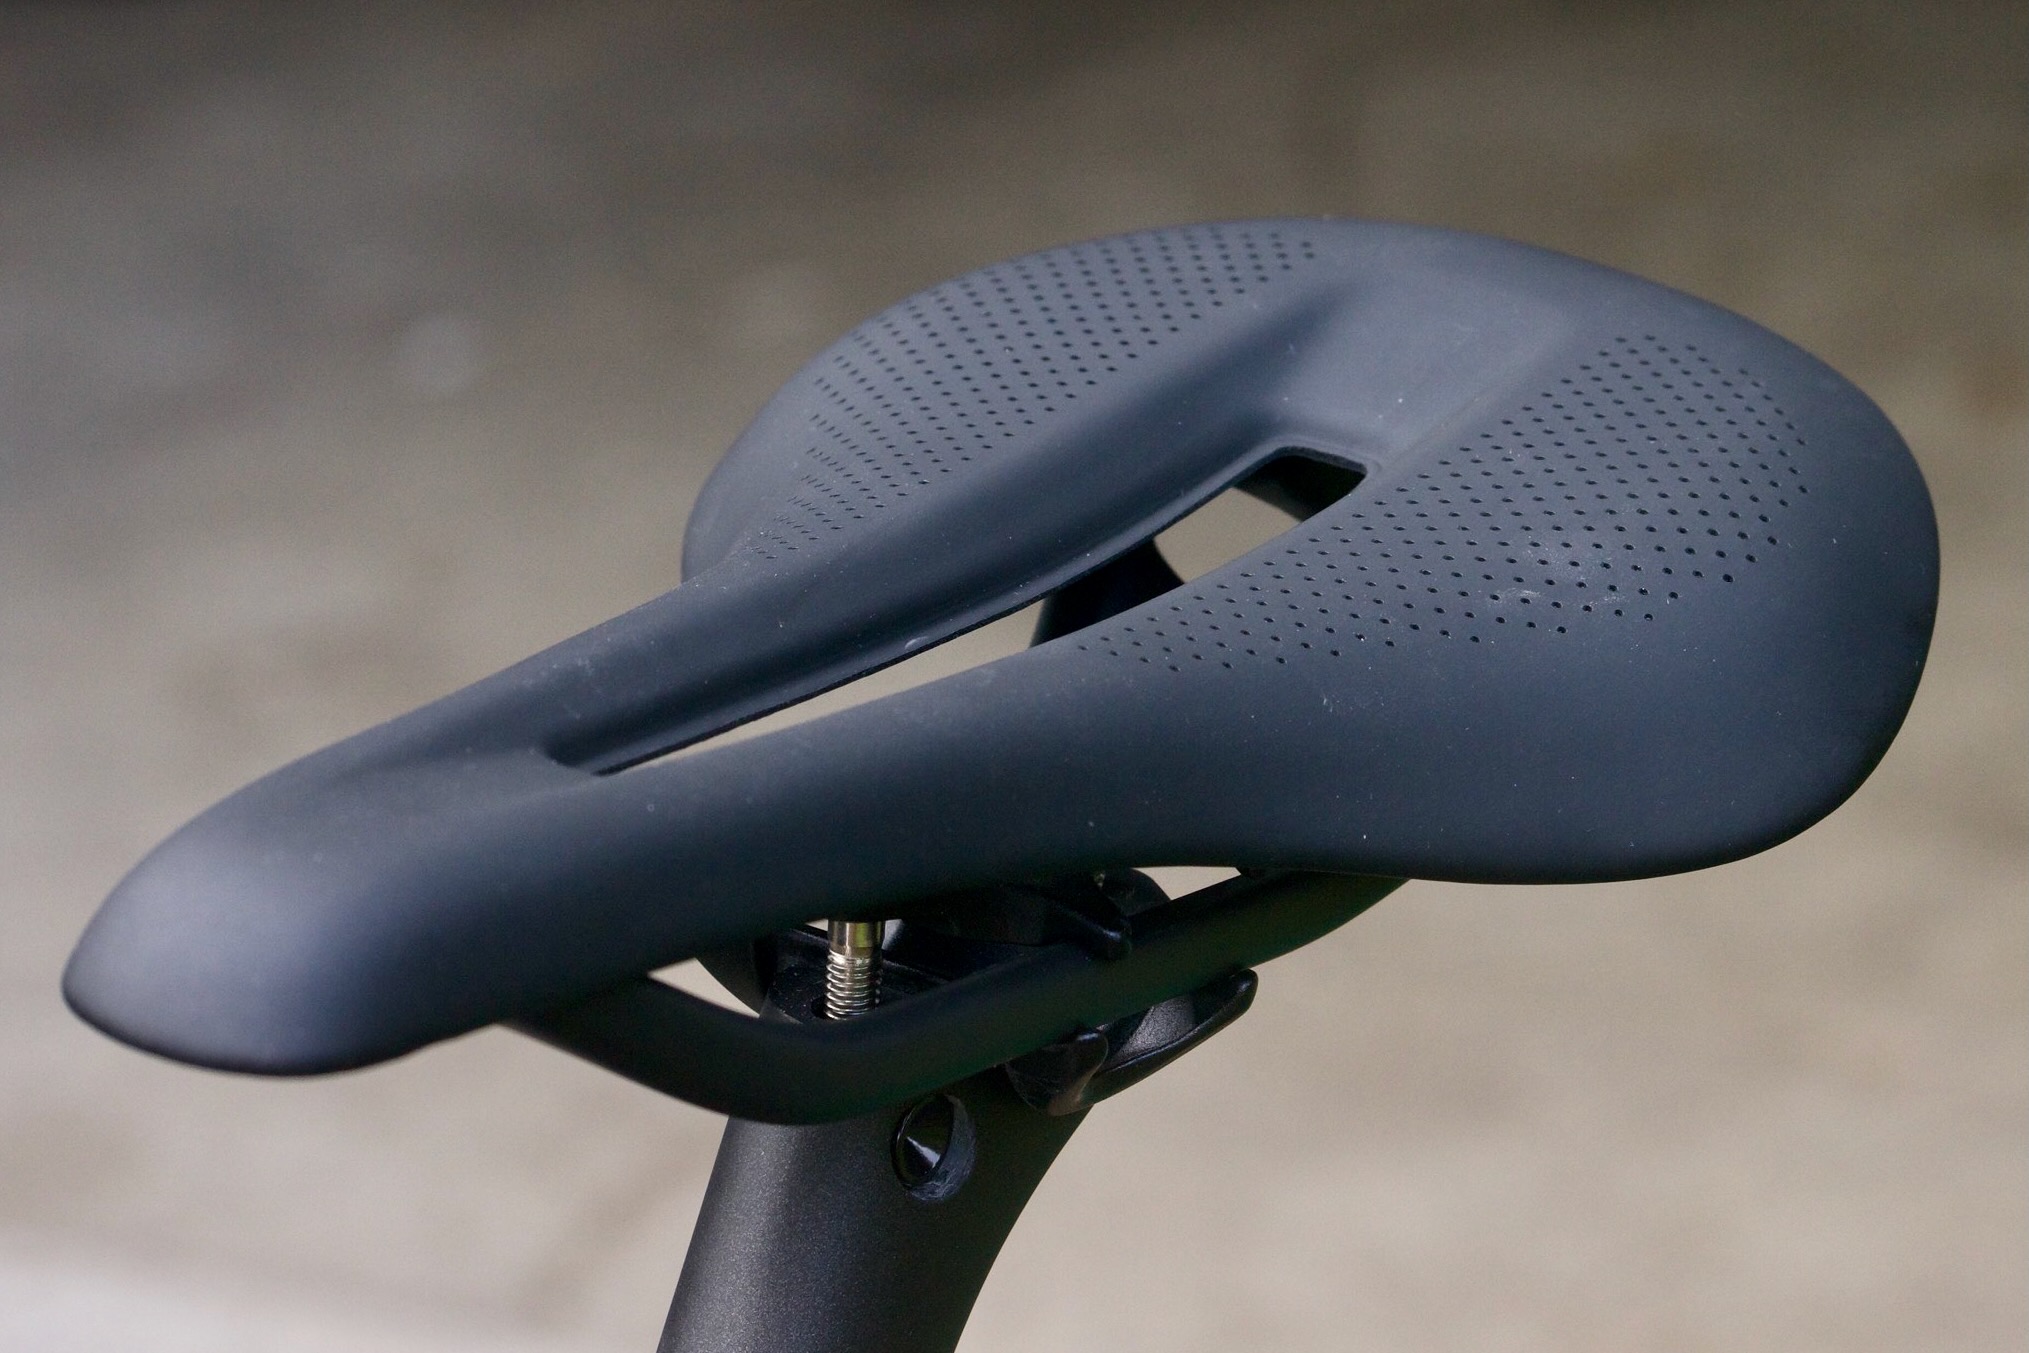 The side to side profile of the Trek RSL road bike saddle